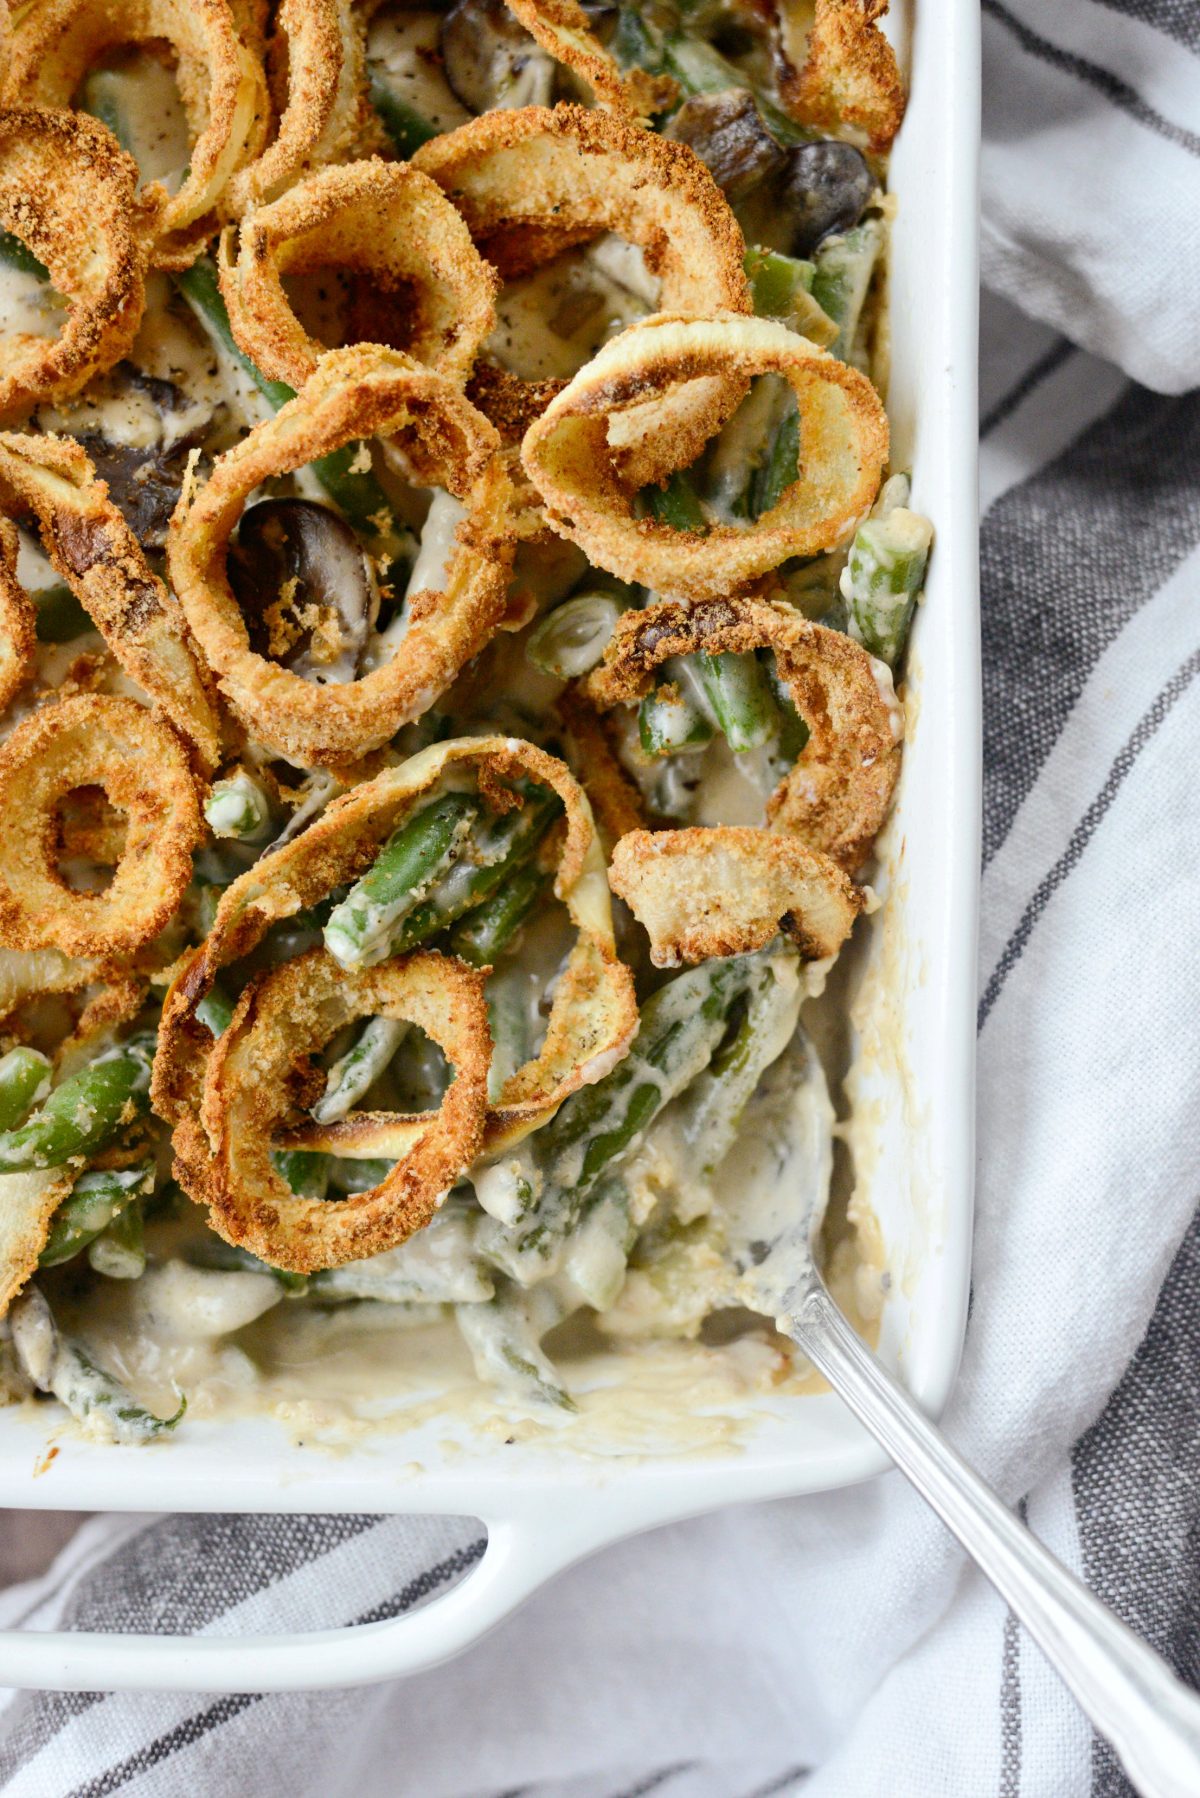 Fresh Green Bean Casserole with Onion Ring Topping l SimplyScratch.com #thanksgiving #sidedish #greenbean #casserole #fromscratch #homemade #onionring